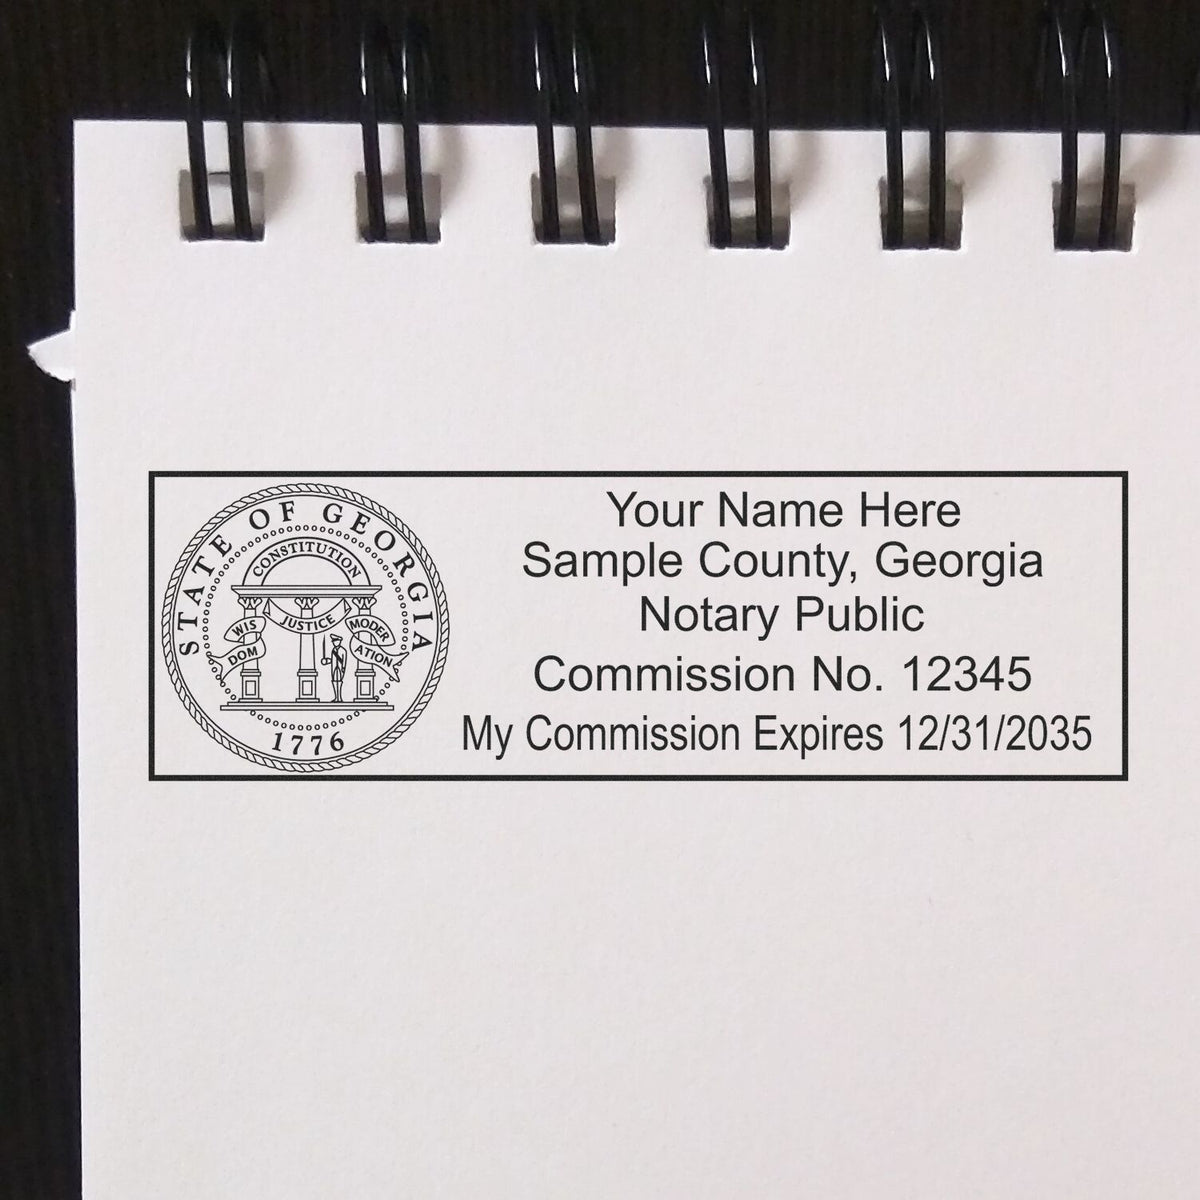 A lifestyle photo showing a stamped image of the Heavy-Duty Georgia Rectangular Notary Stamp on a piece of paper